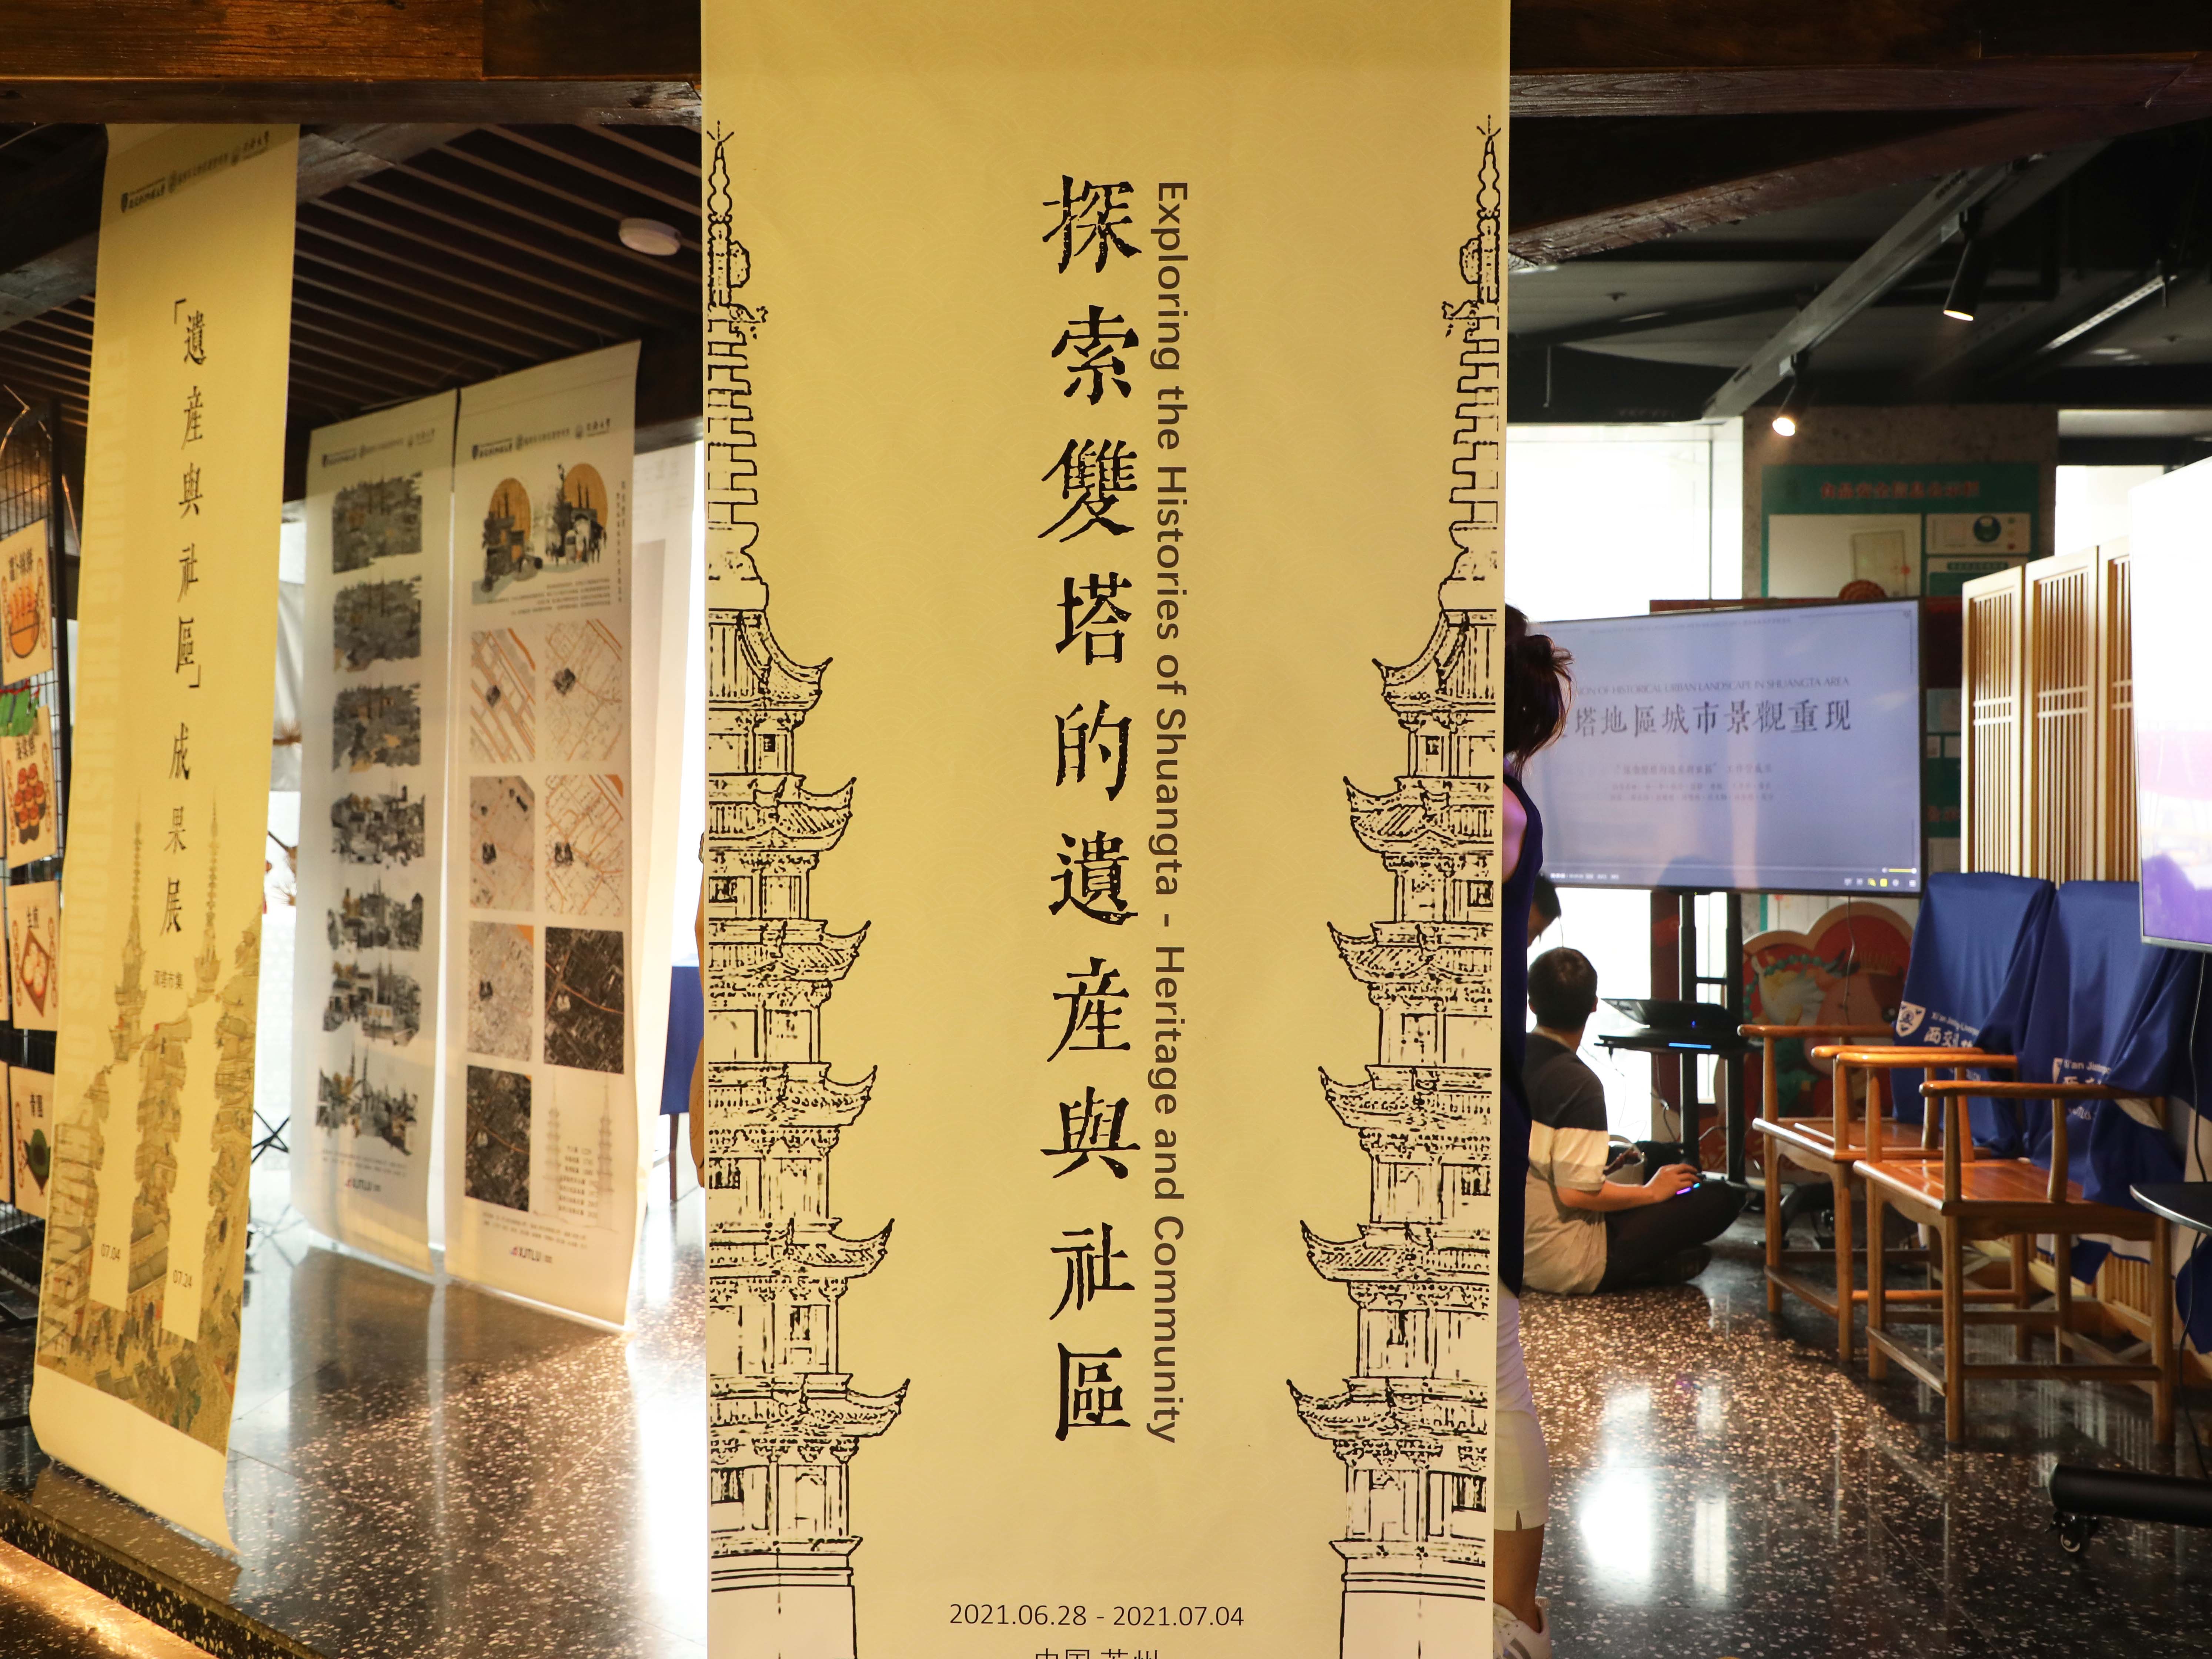 Interdisciplinary workshop exhibits outcome in Shuangta area exploring heritage and community